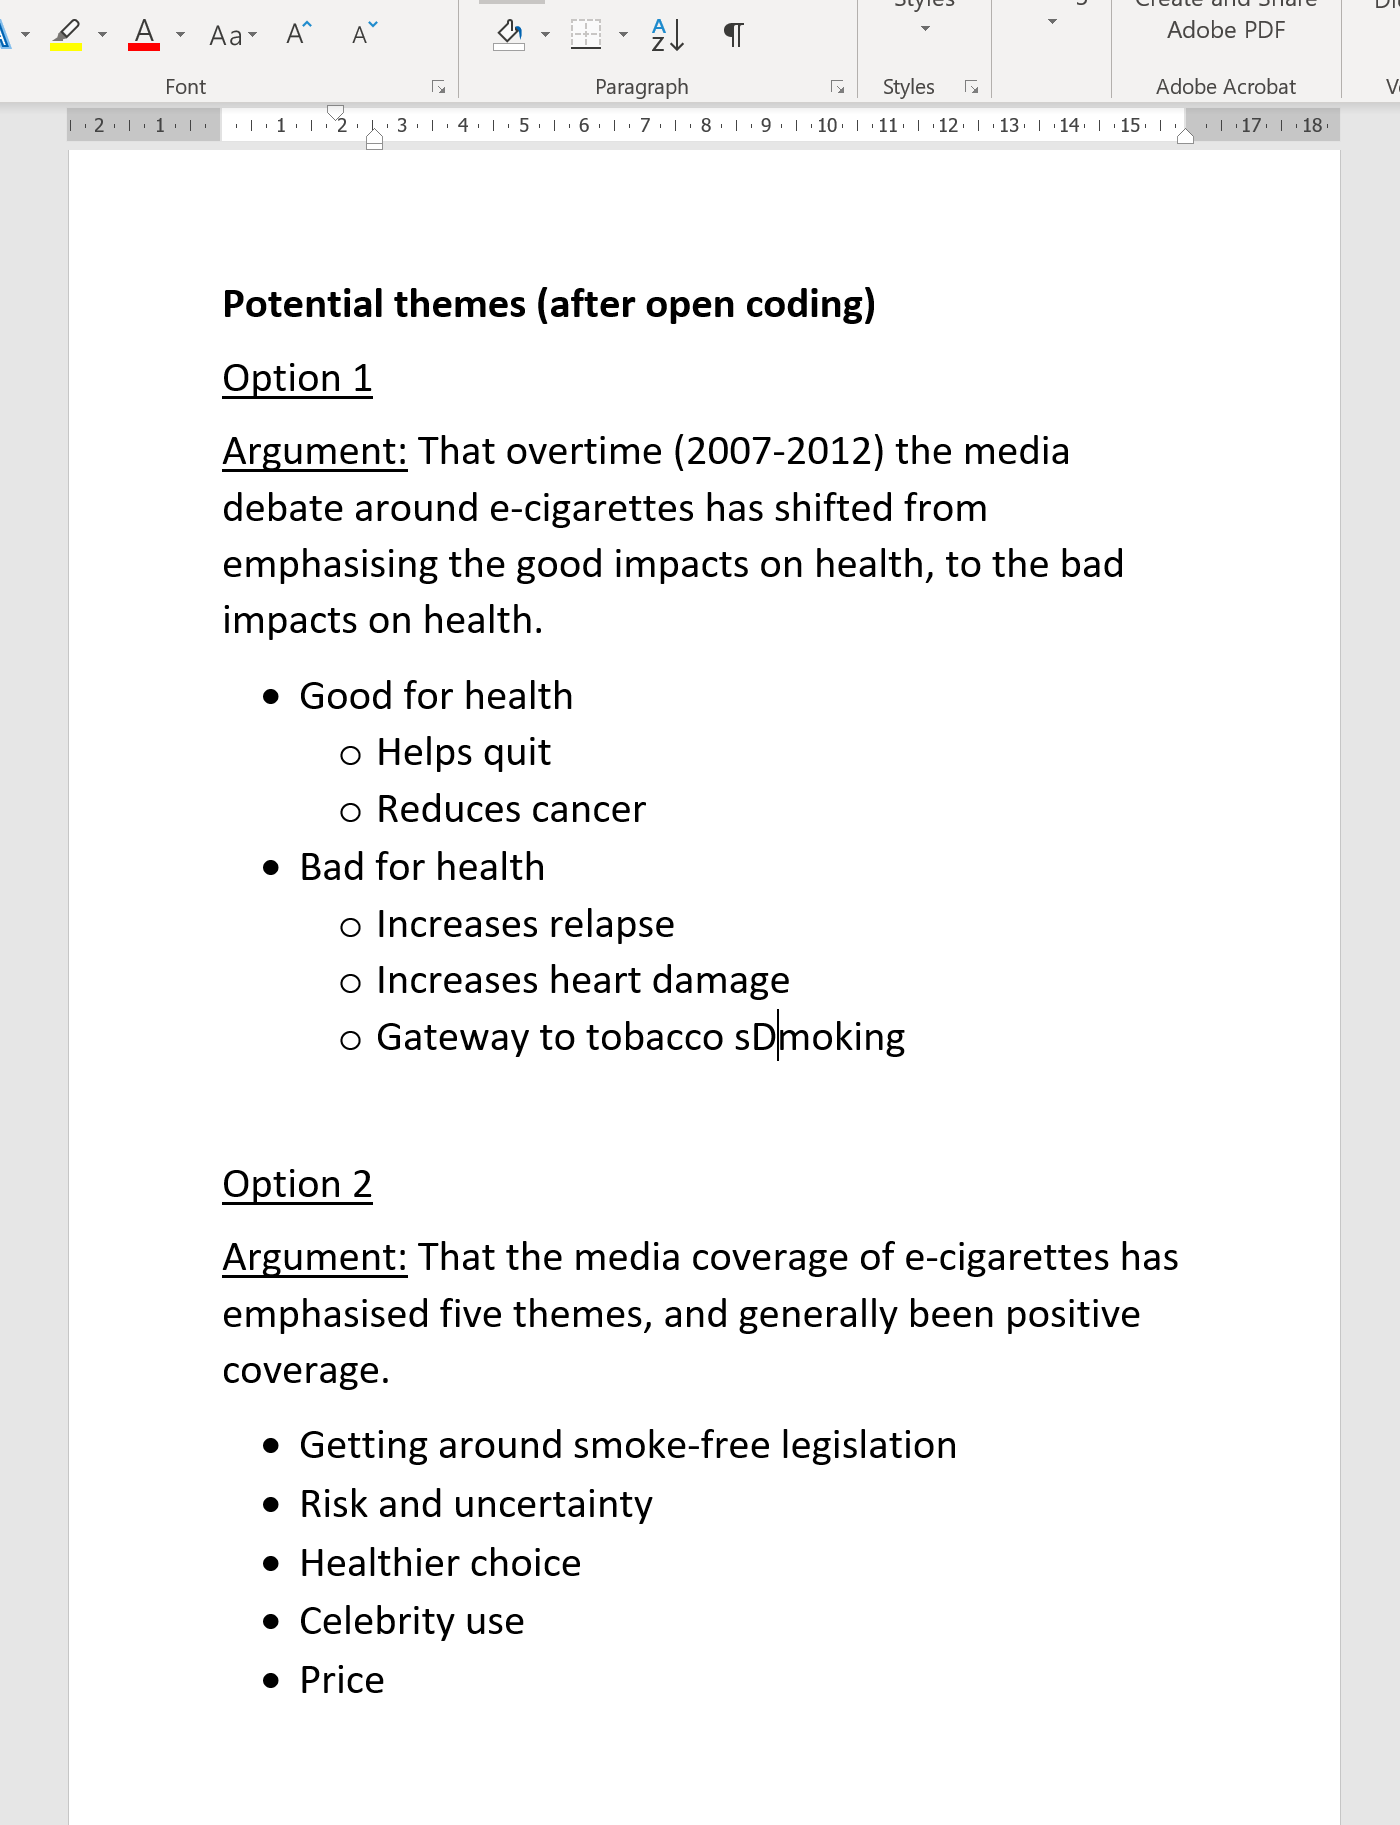 Two different hypothetical ways of framing the argument and themes of articles on e-cigarettes.